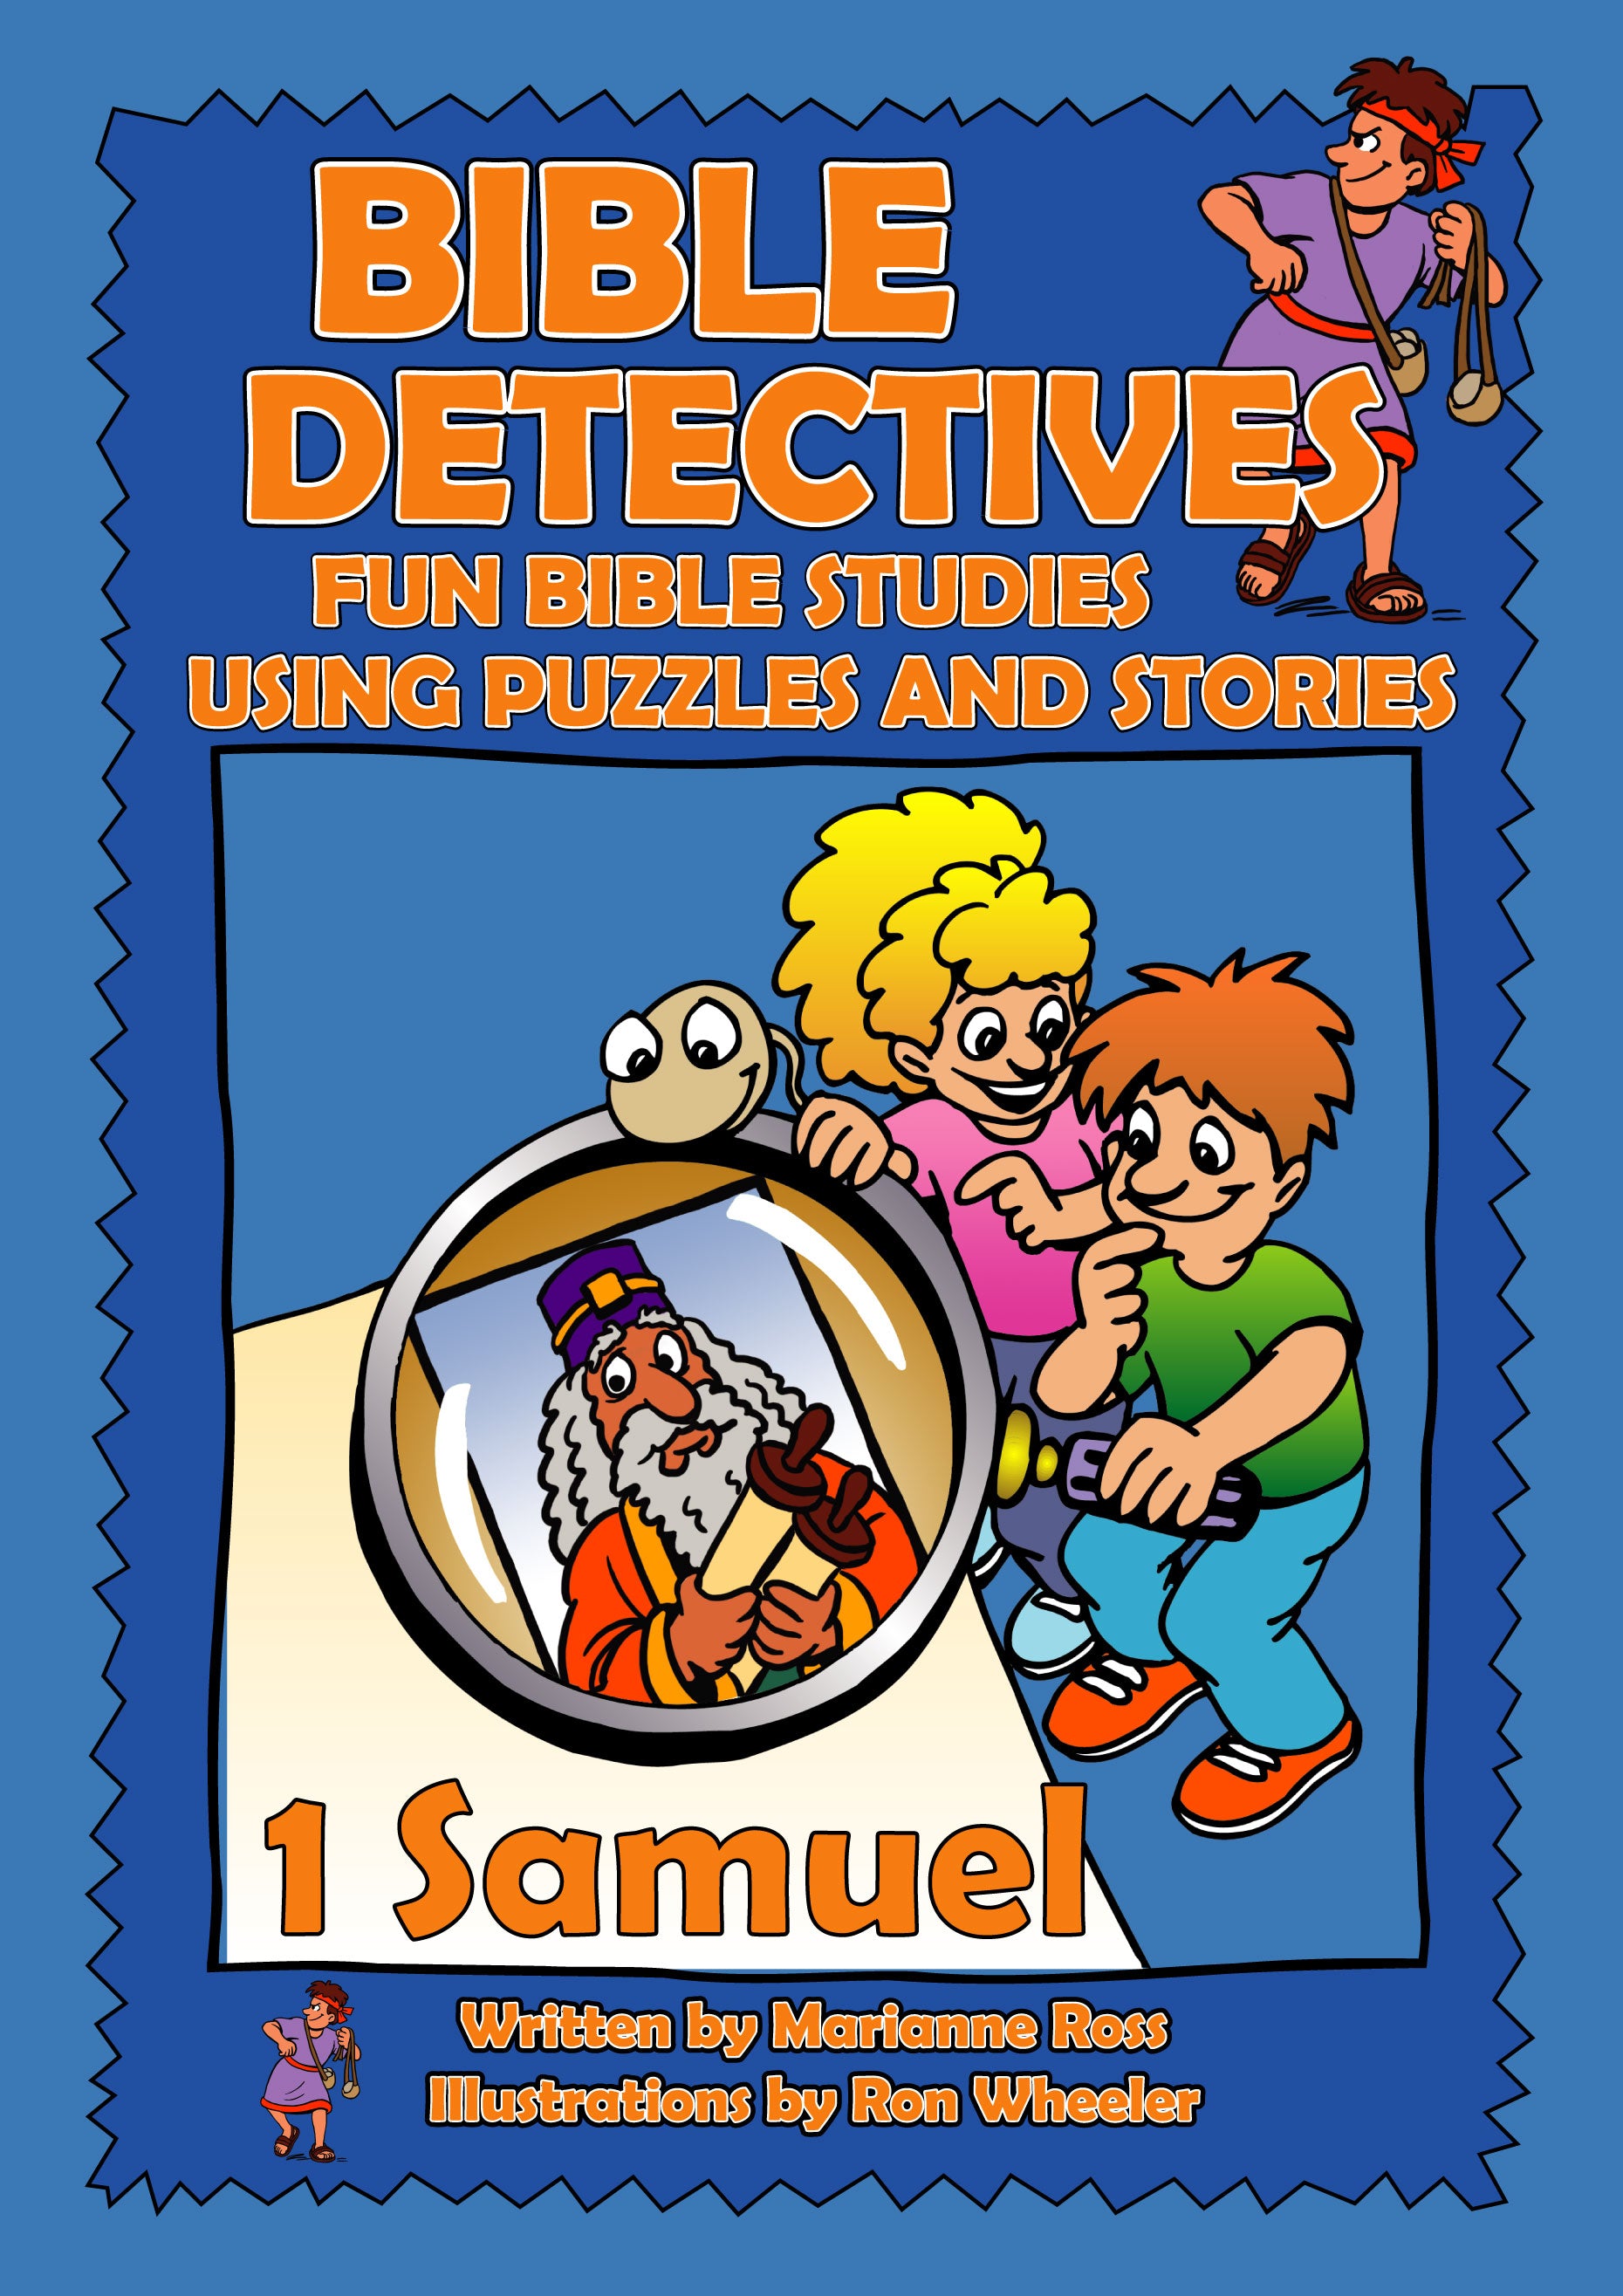 Image of Bible Detectives - 1 Samuel other